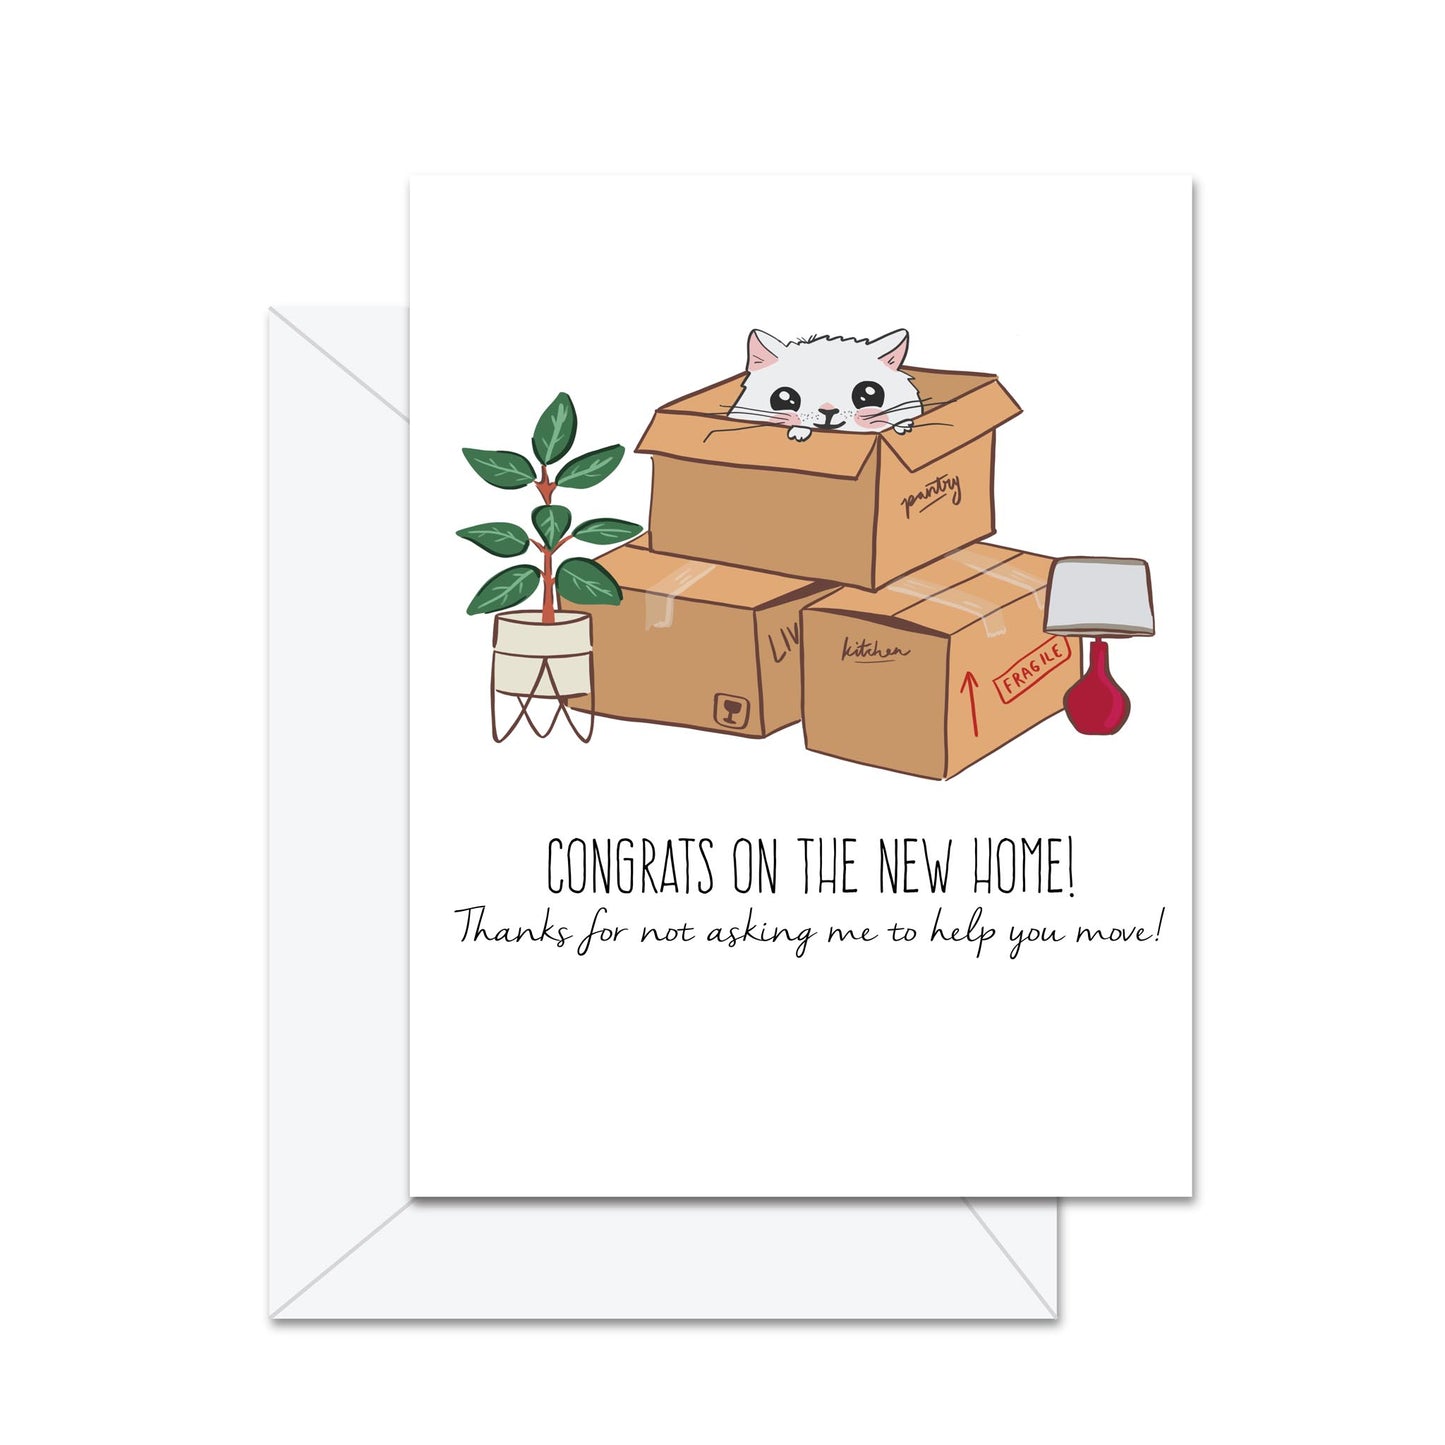 Congrats On The New Home, Thanks for Not Asking Me To Help you Move! - Greeting Card